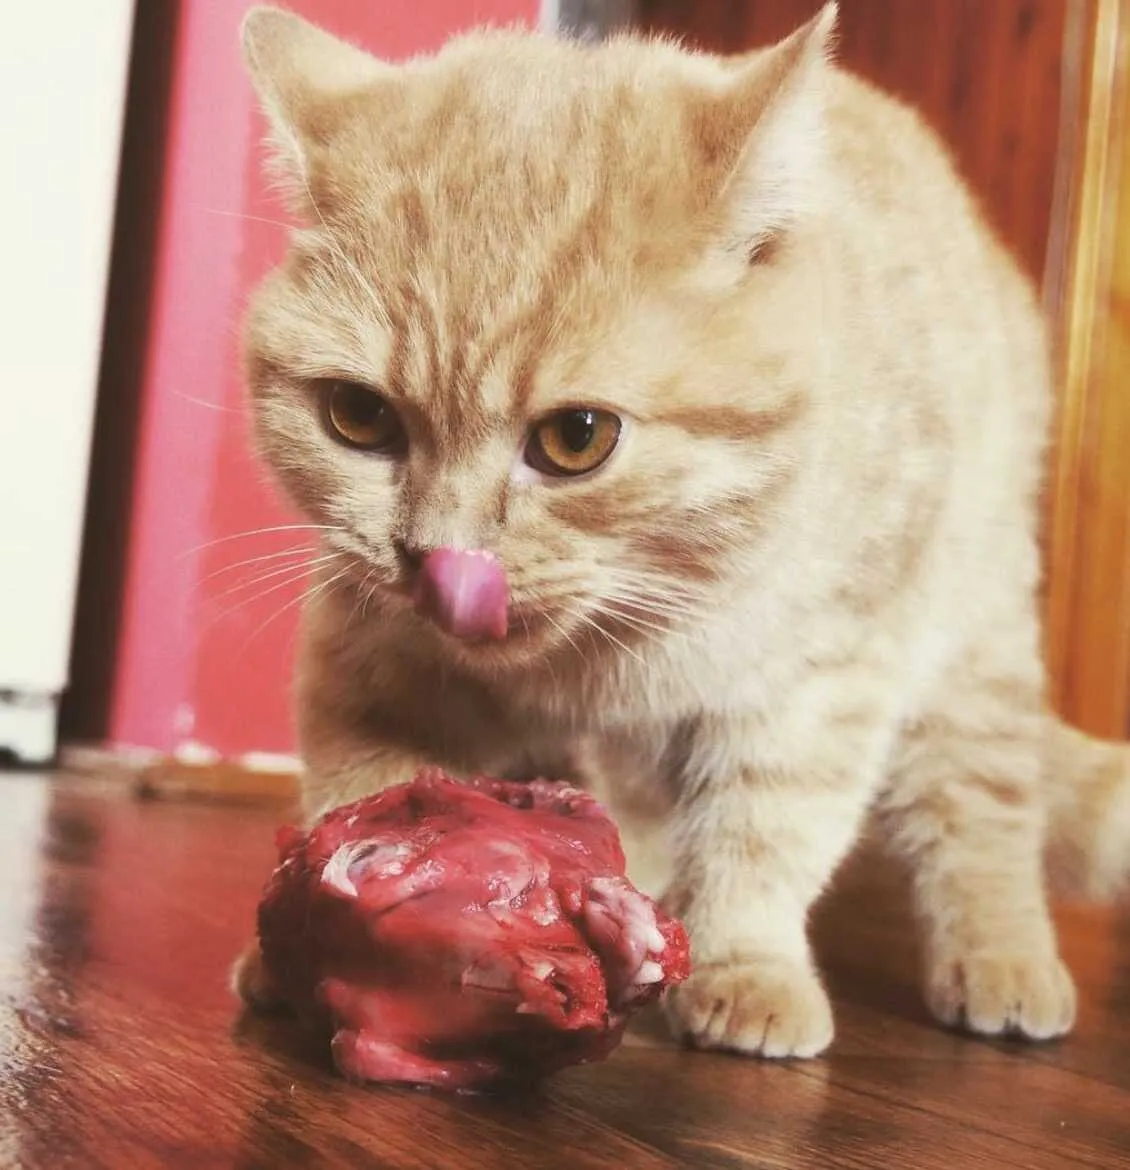 Cat with Raw Meat